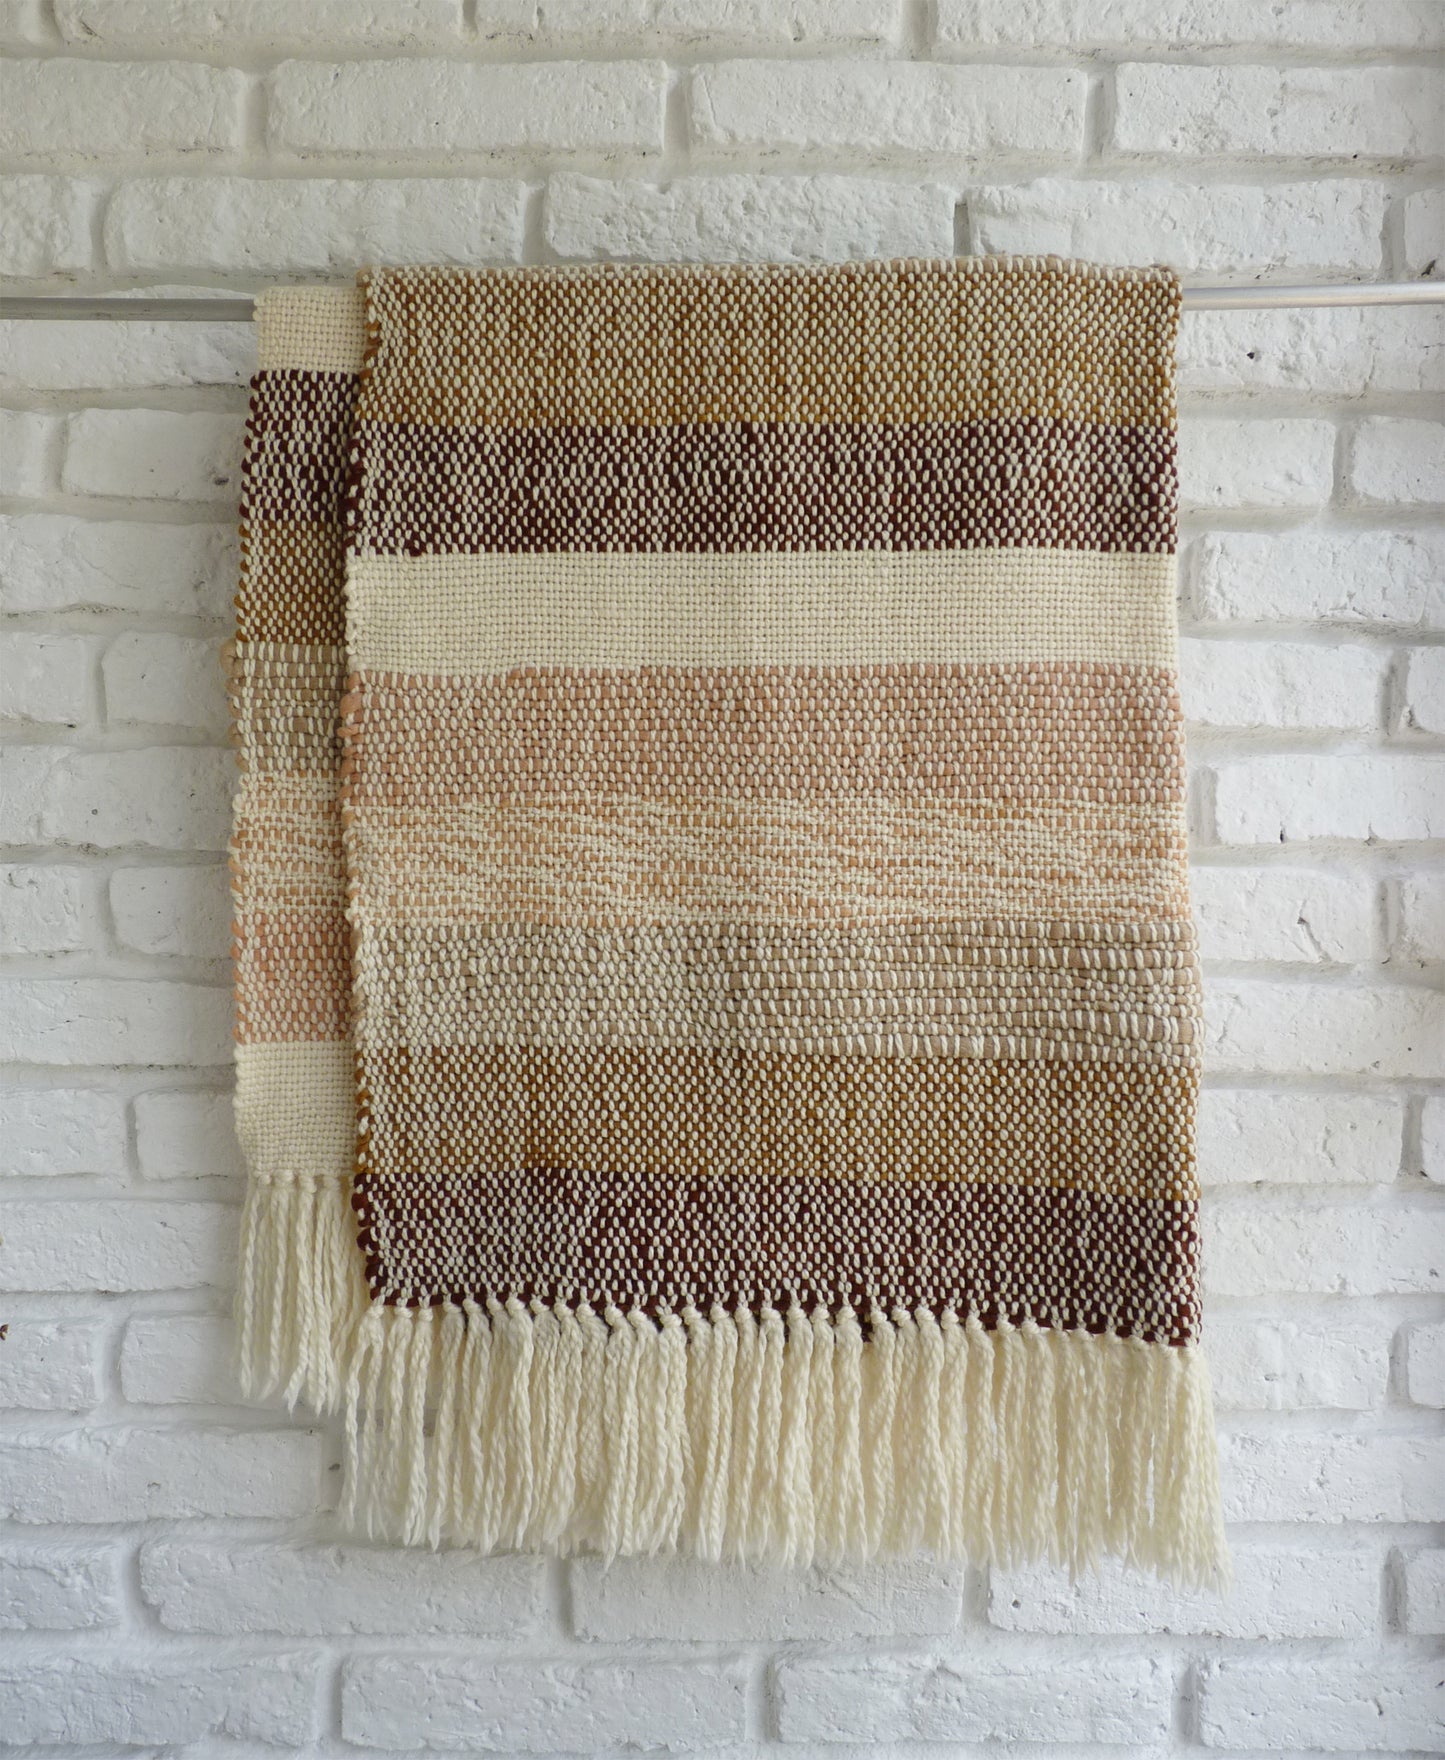 Multicolor Striped Merino Wool Throw Blanket - Handmade Luxury for Your Home Decor and Comfort